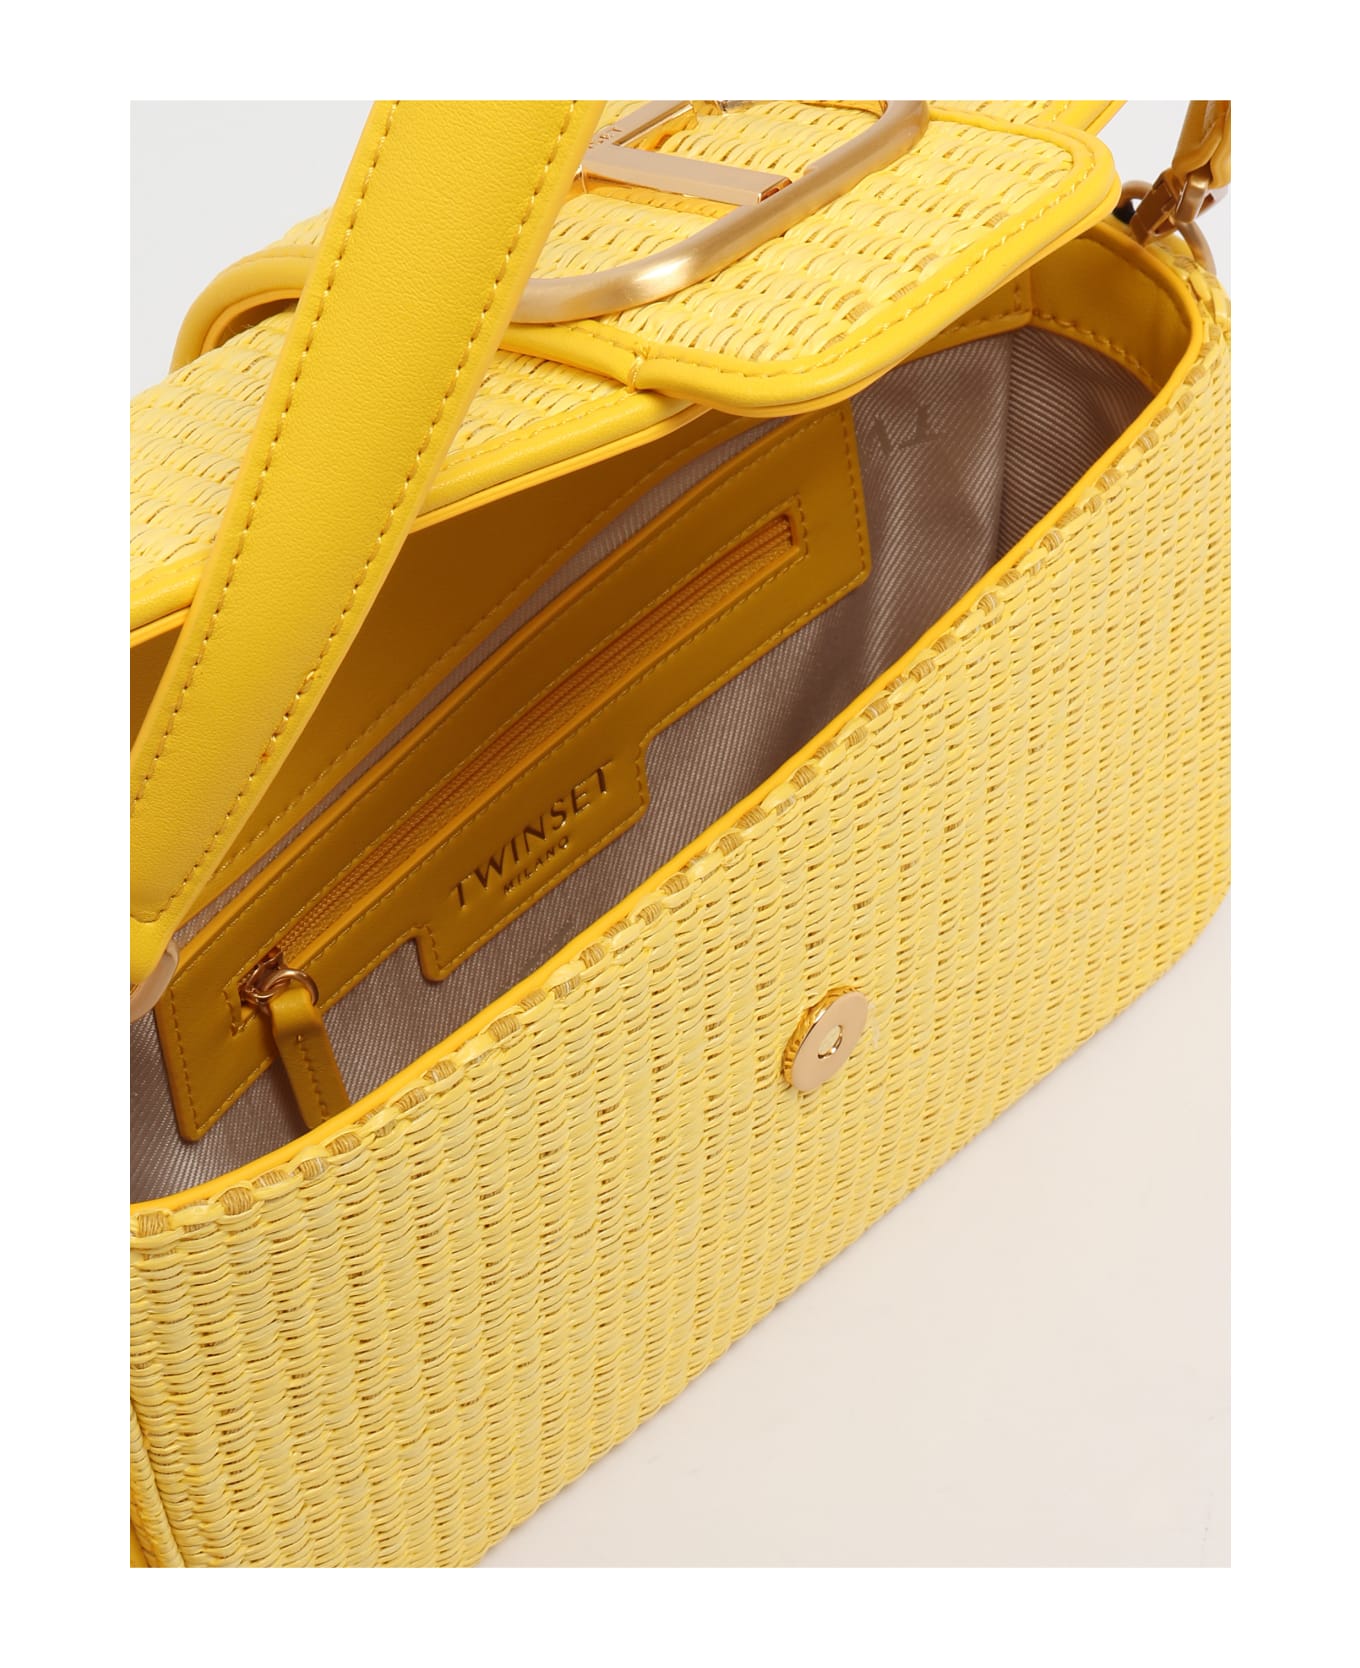 TwinSet Pp Clutch - GIALLO